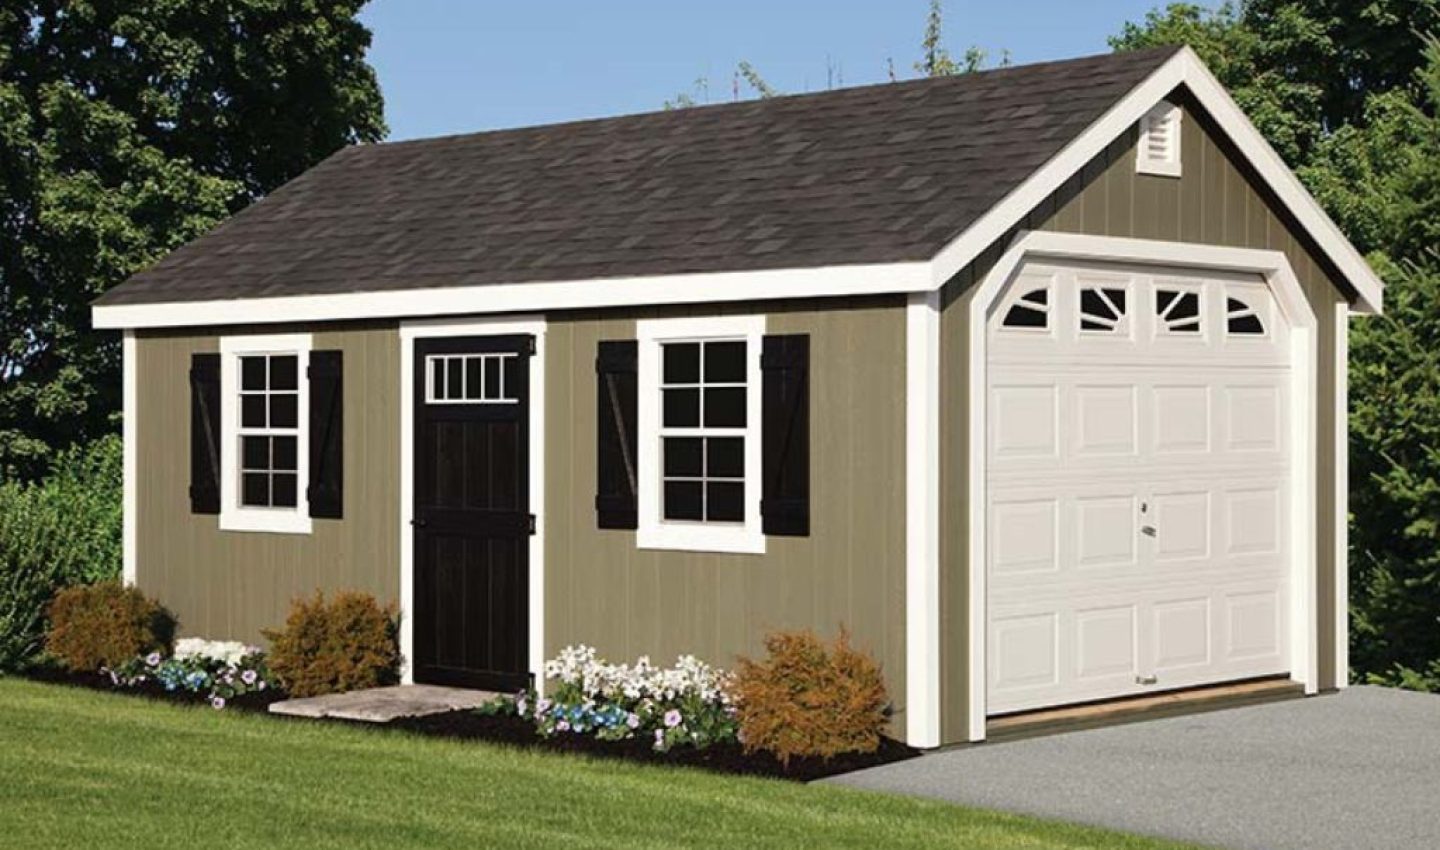 Outdoor Motorcycle Storage Sheds for Protecting the Machine You Love